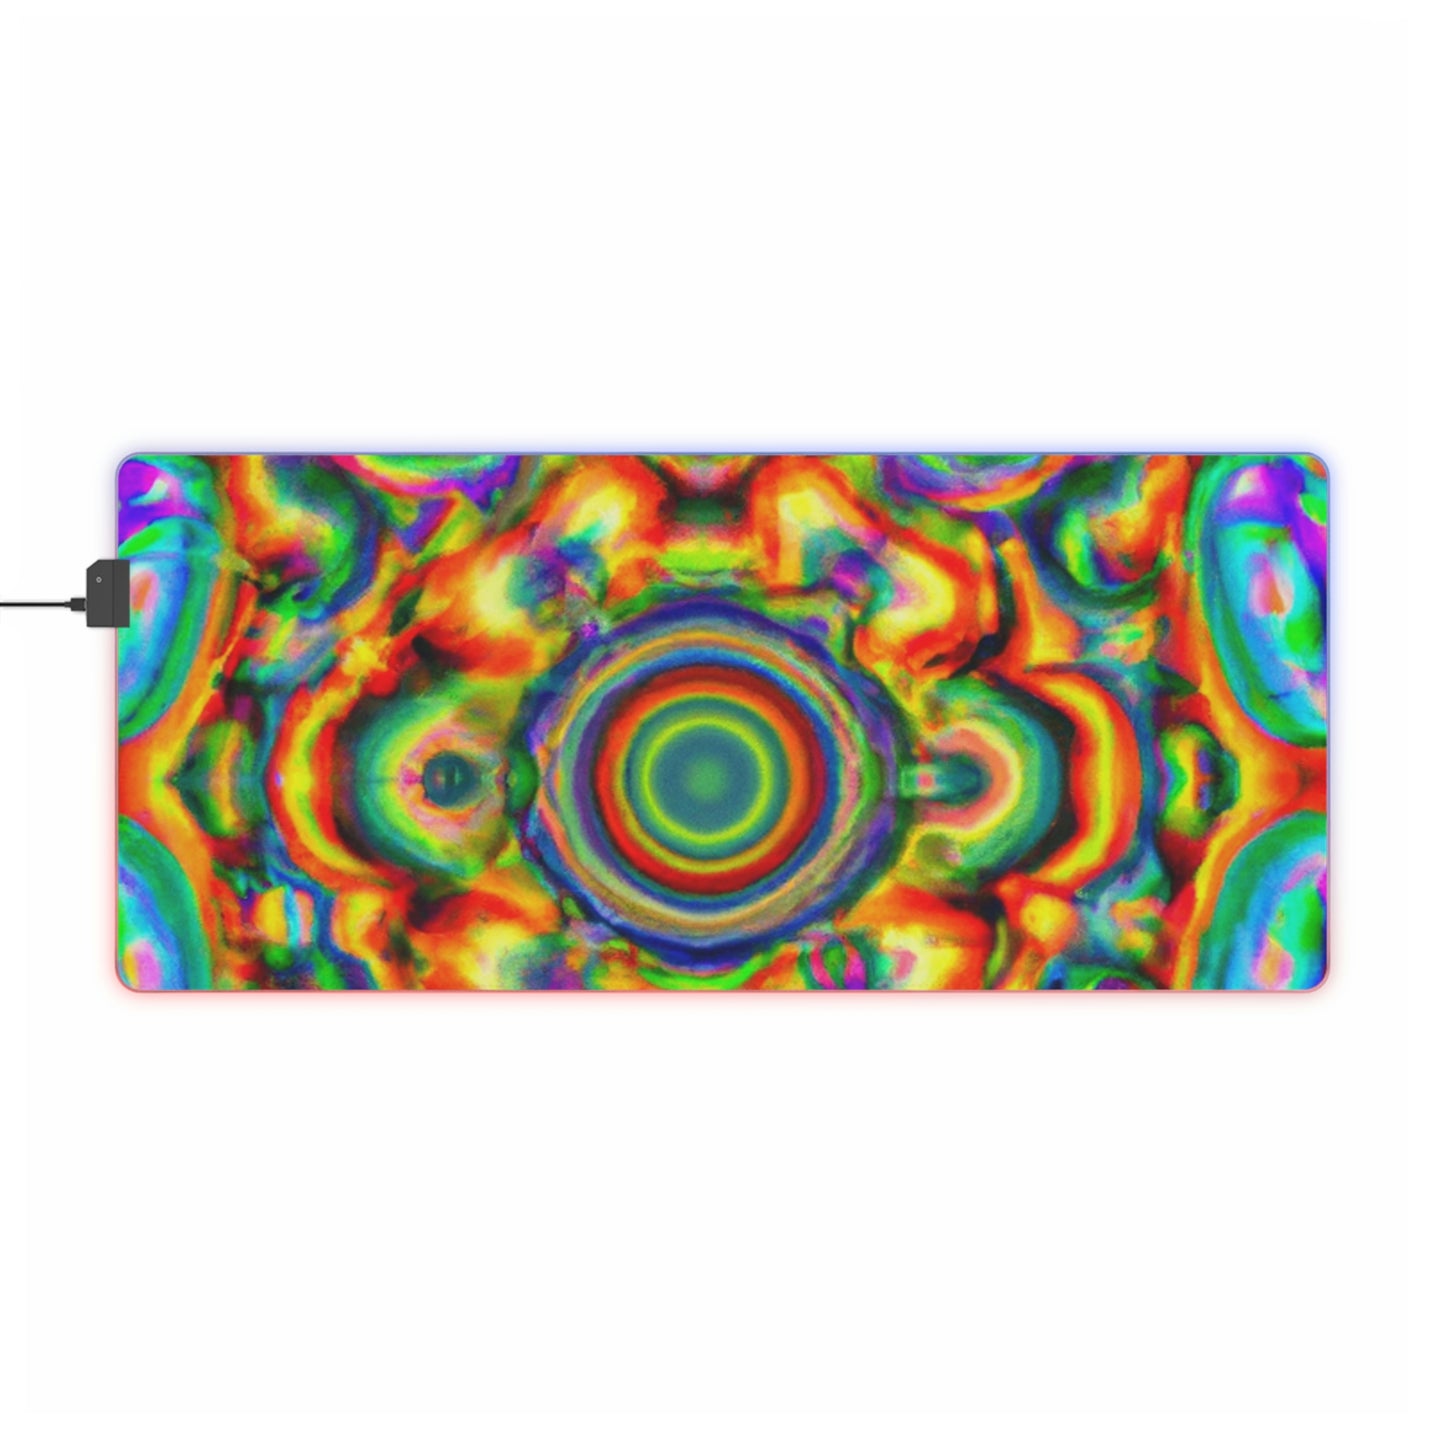 .

Freddie Fabulous - Psychedelic Trippy LED Light Up Gaming Mouse Pad